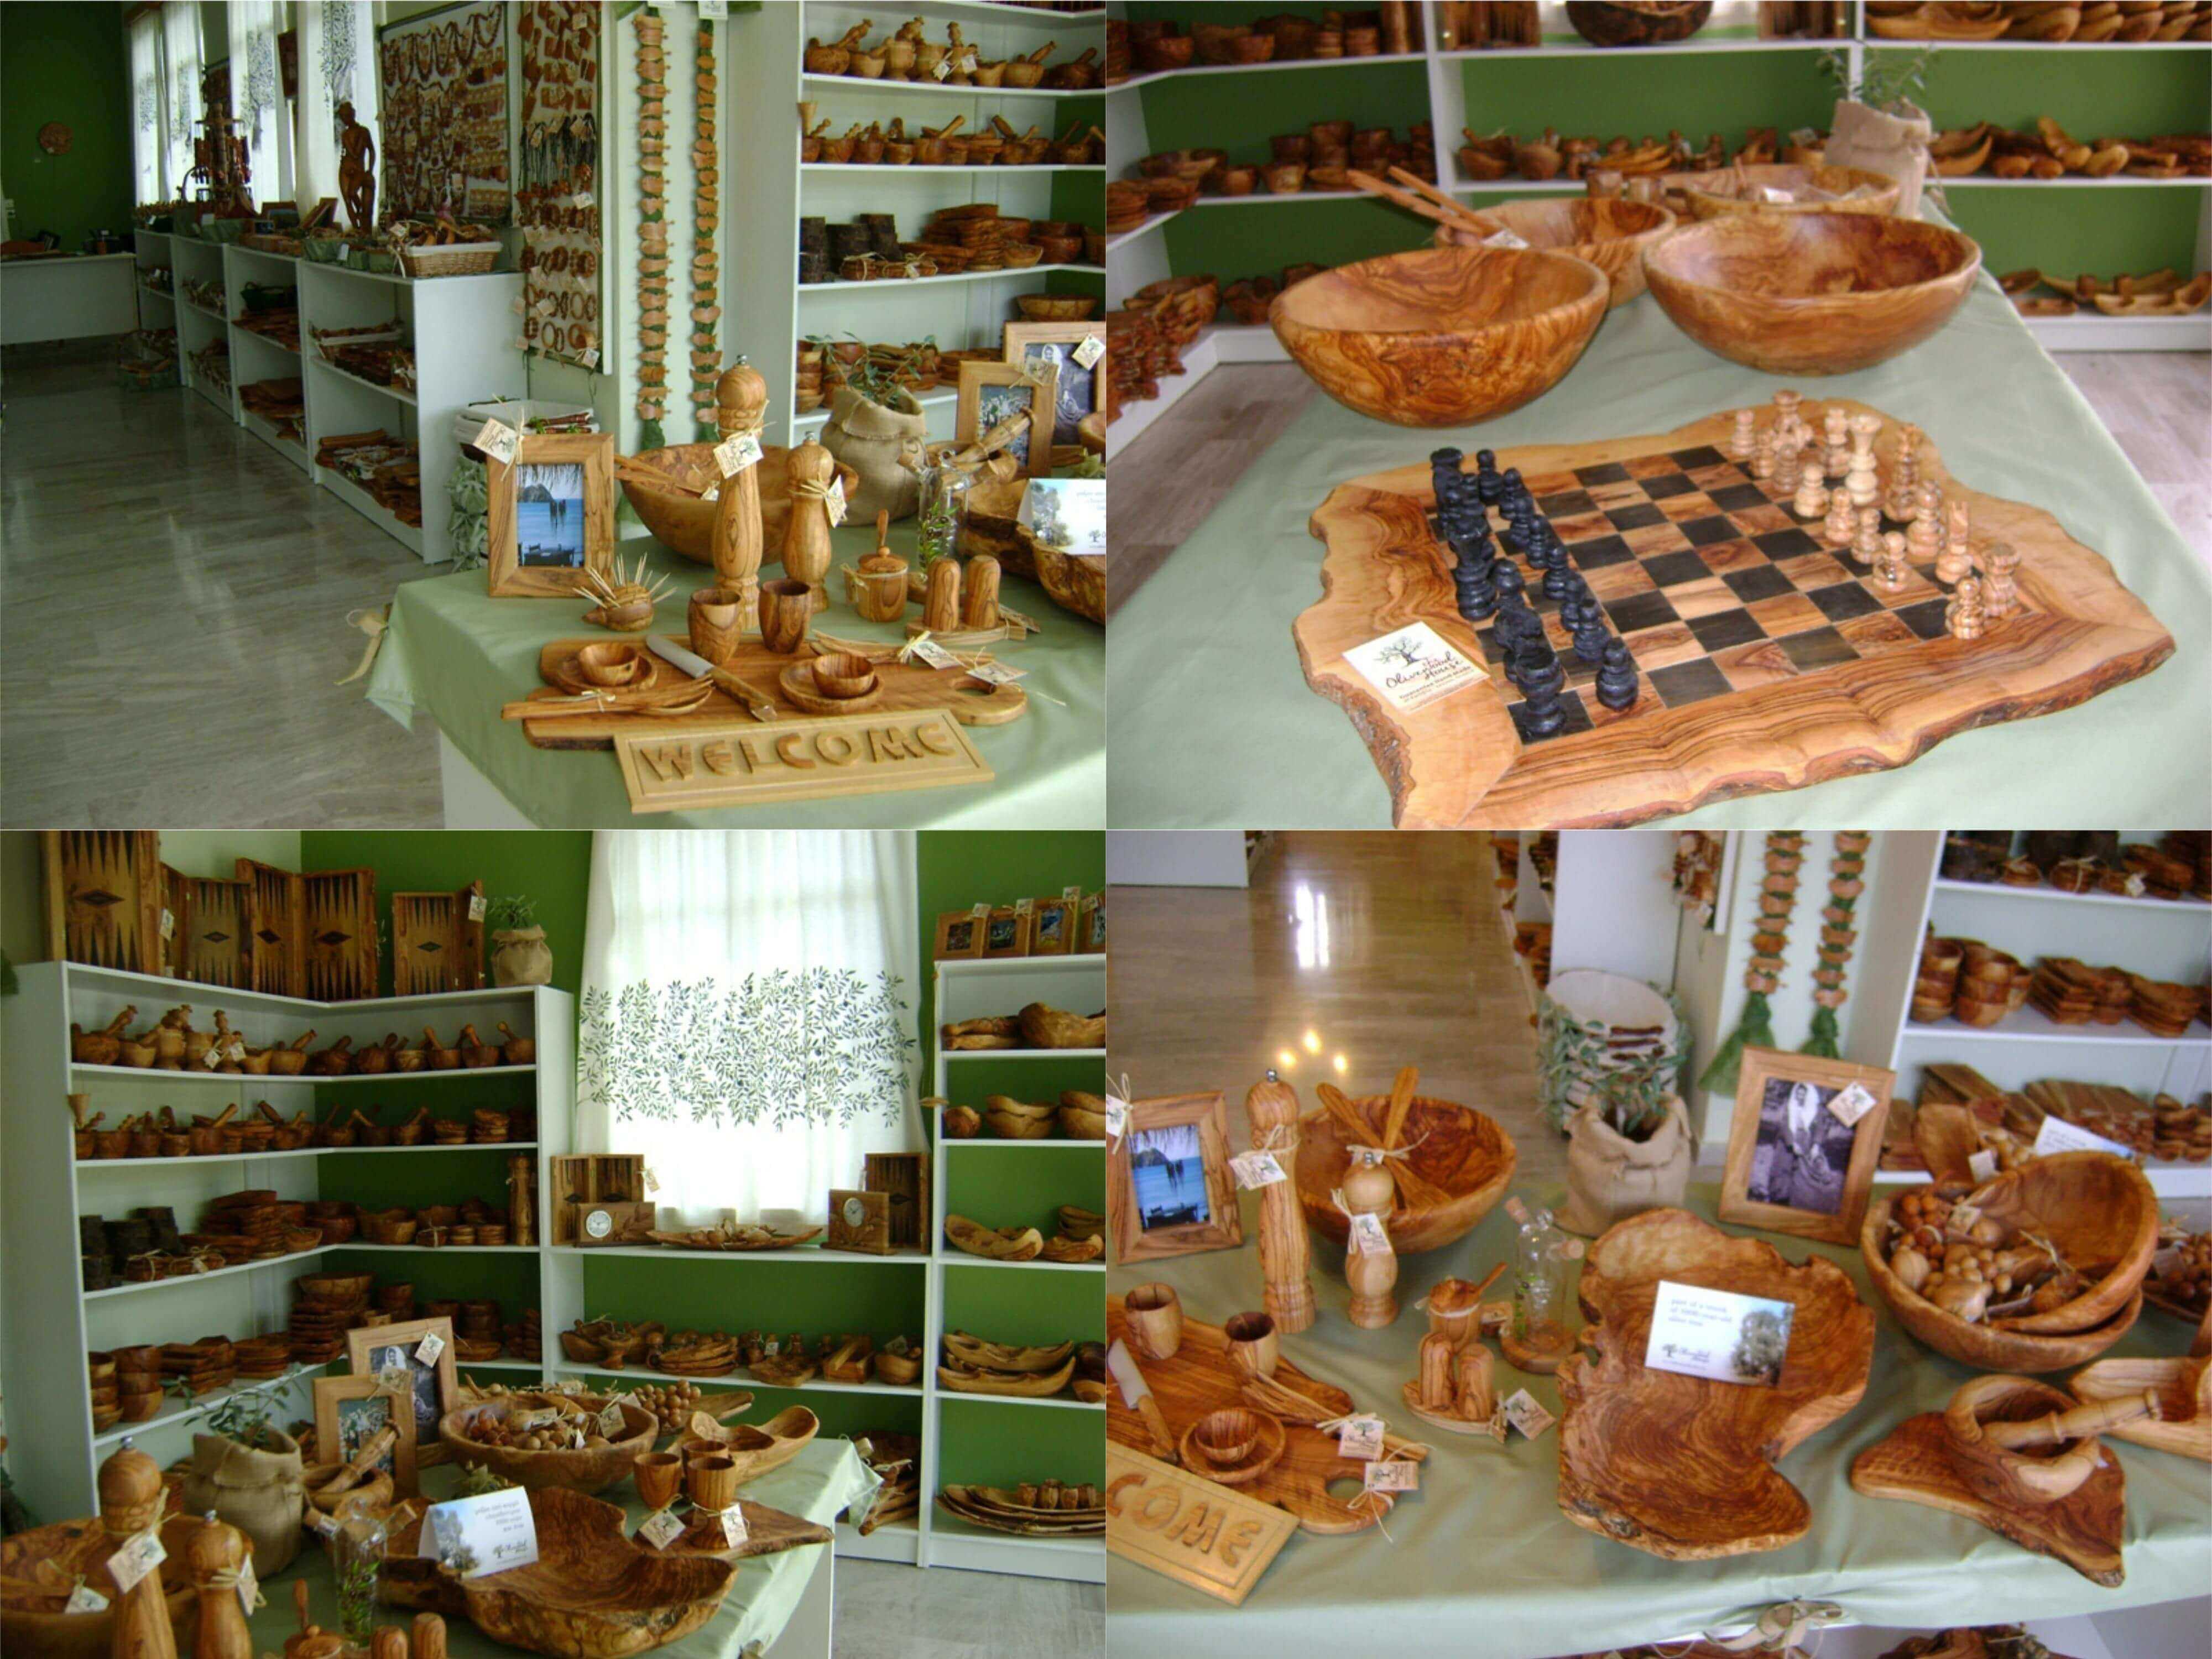 The OliveWood House Handmade Products